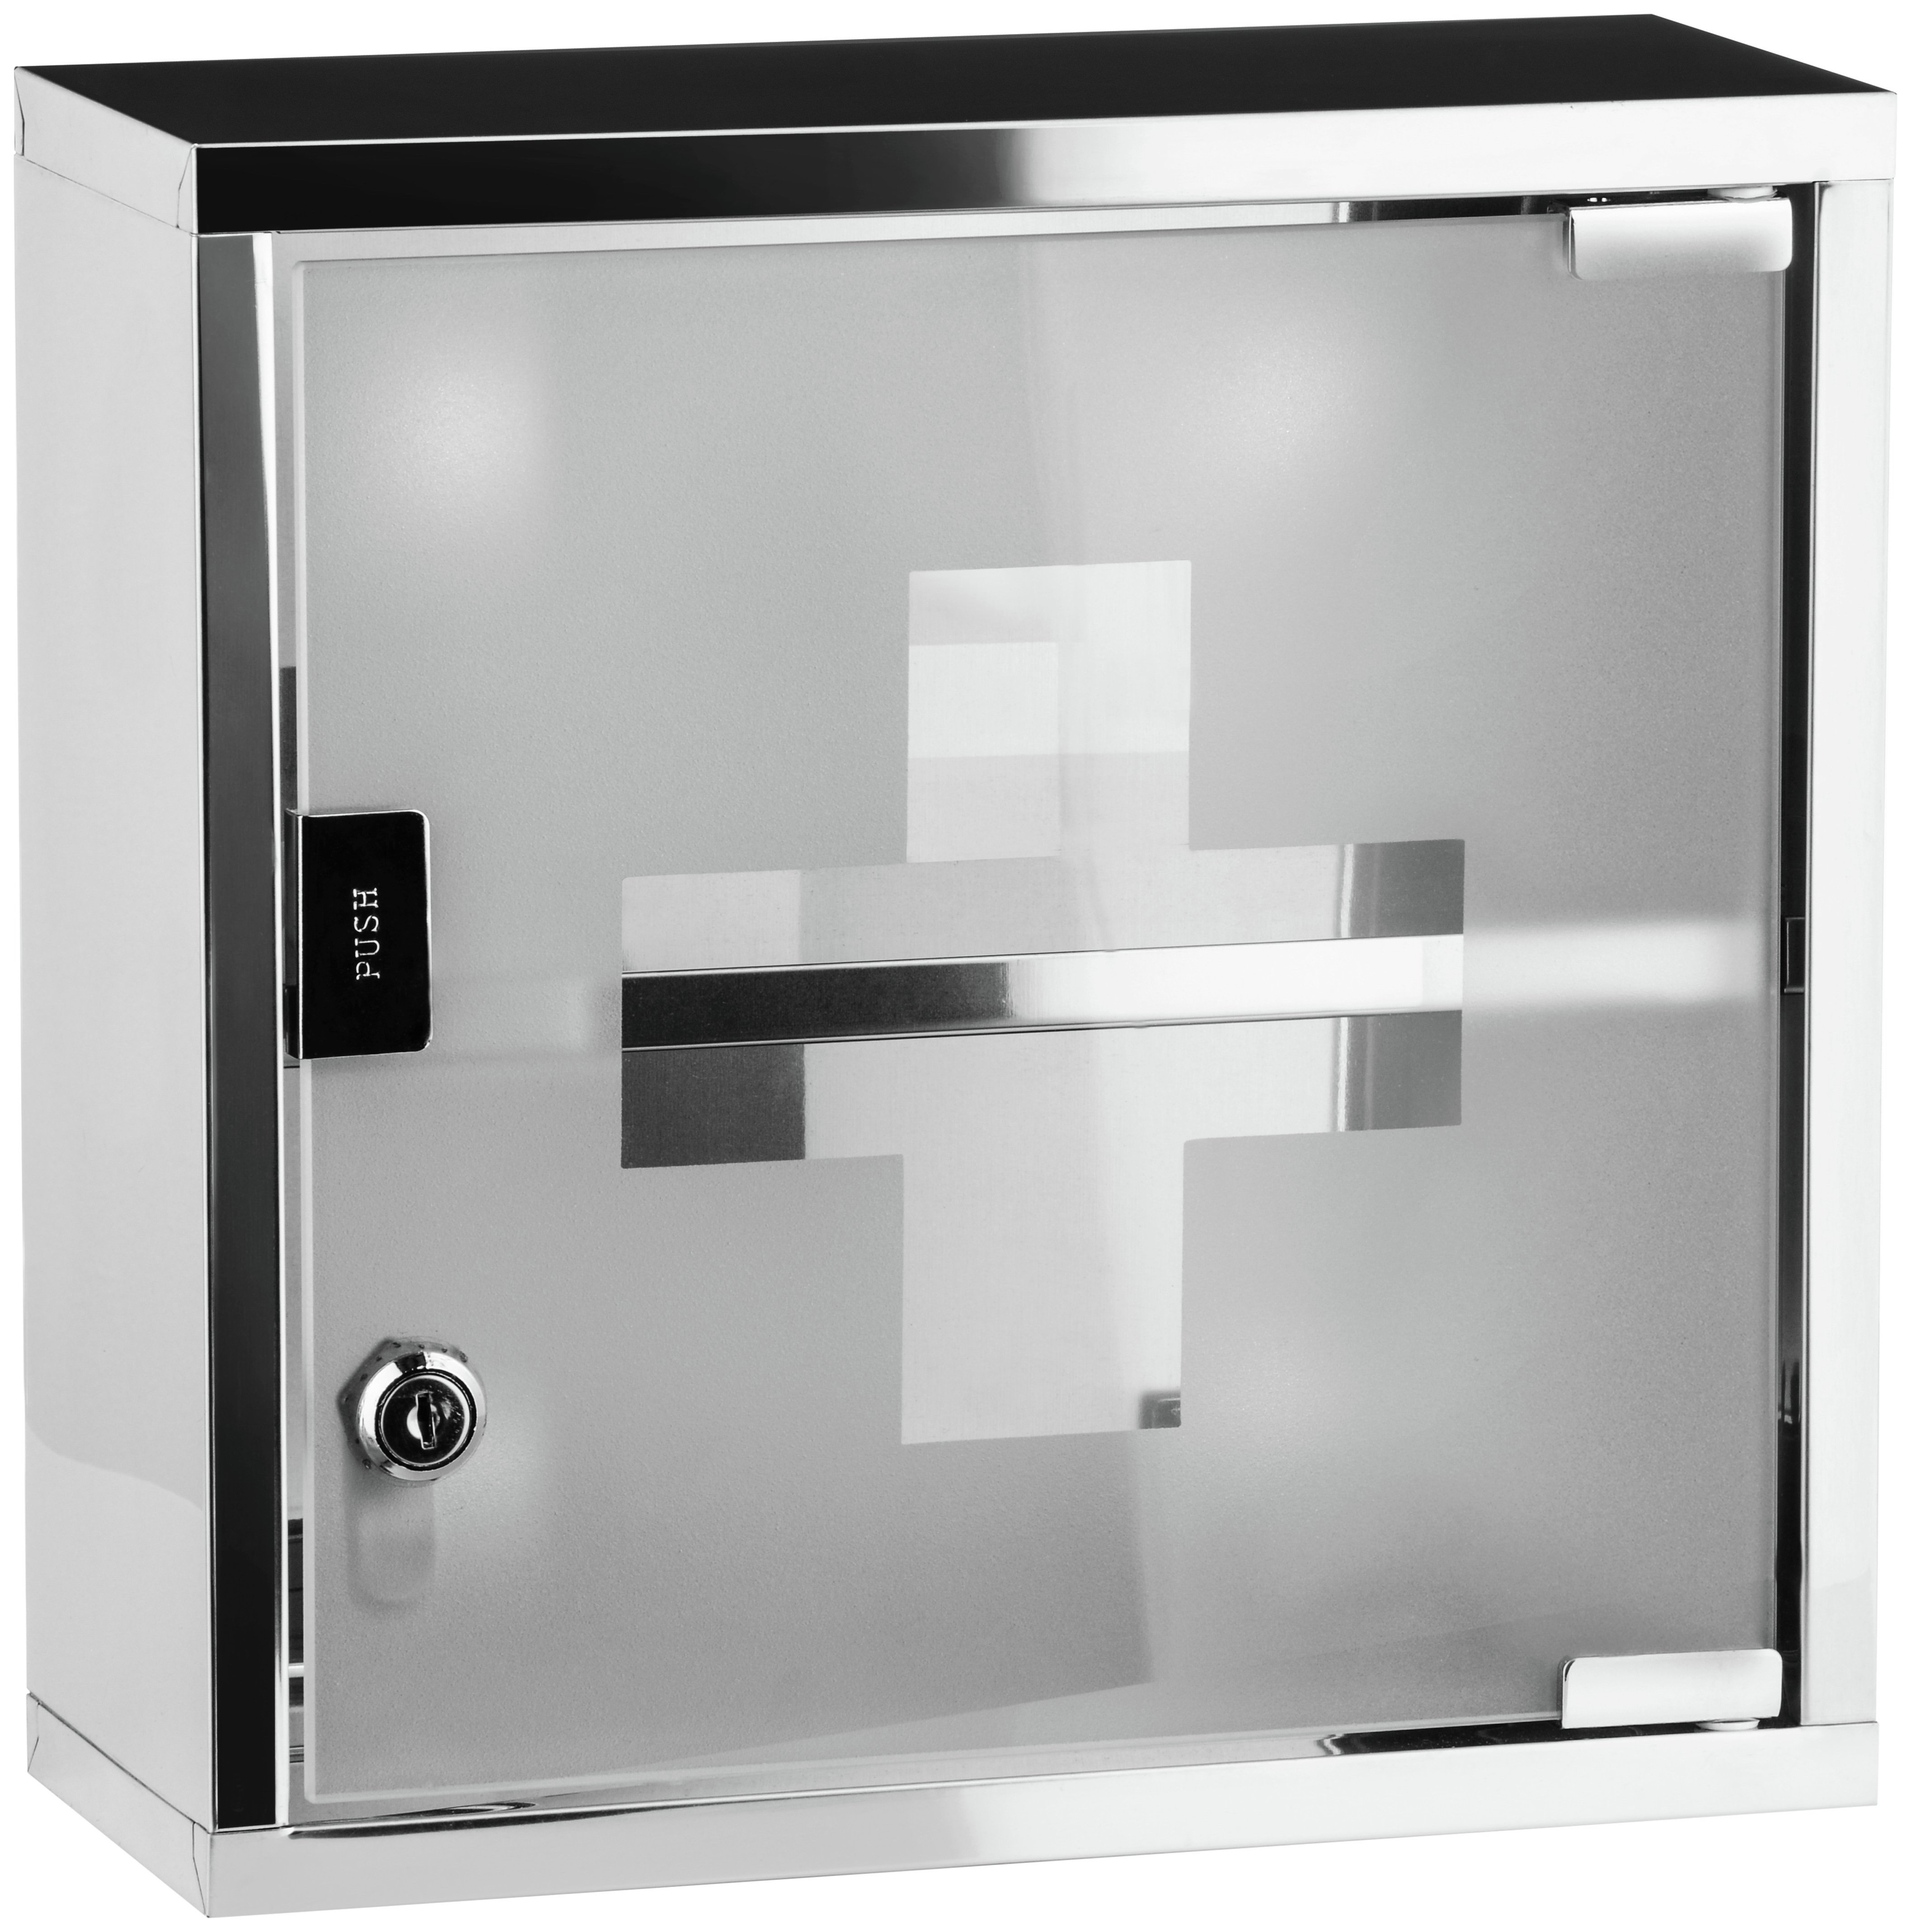 Premier Housewares Stainless Steel Medicine Cabinet review